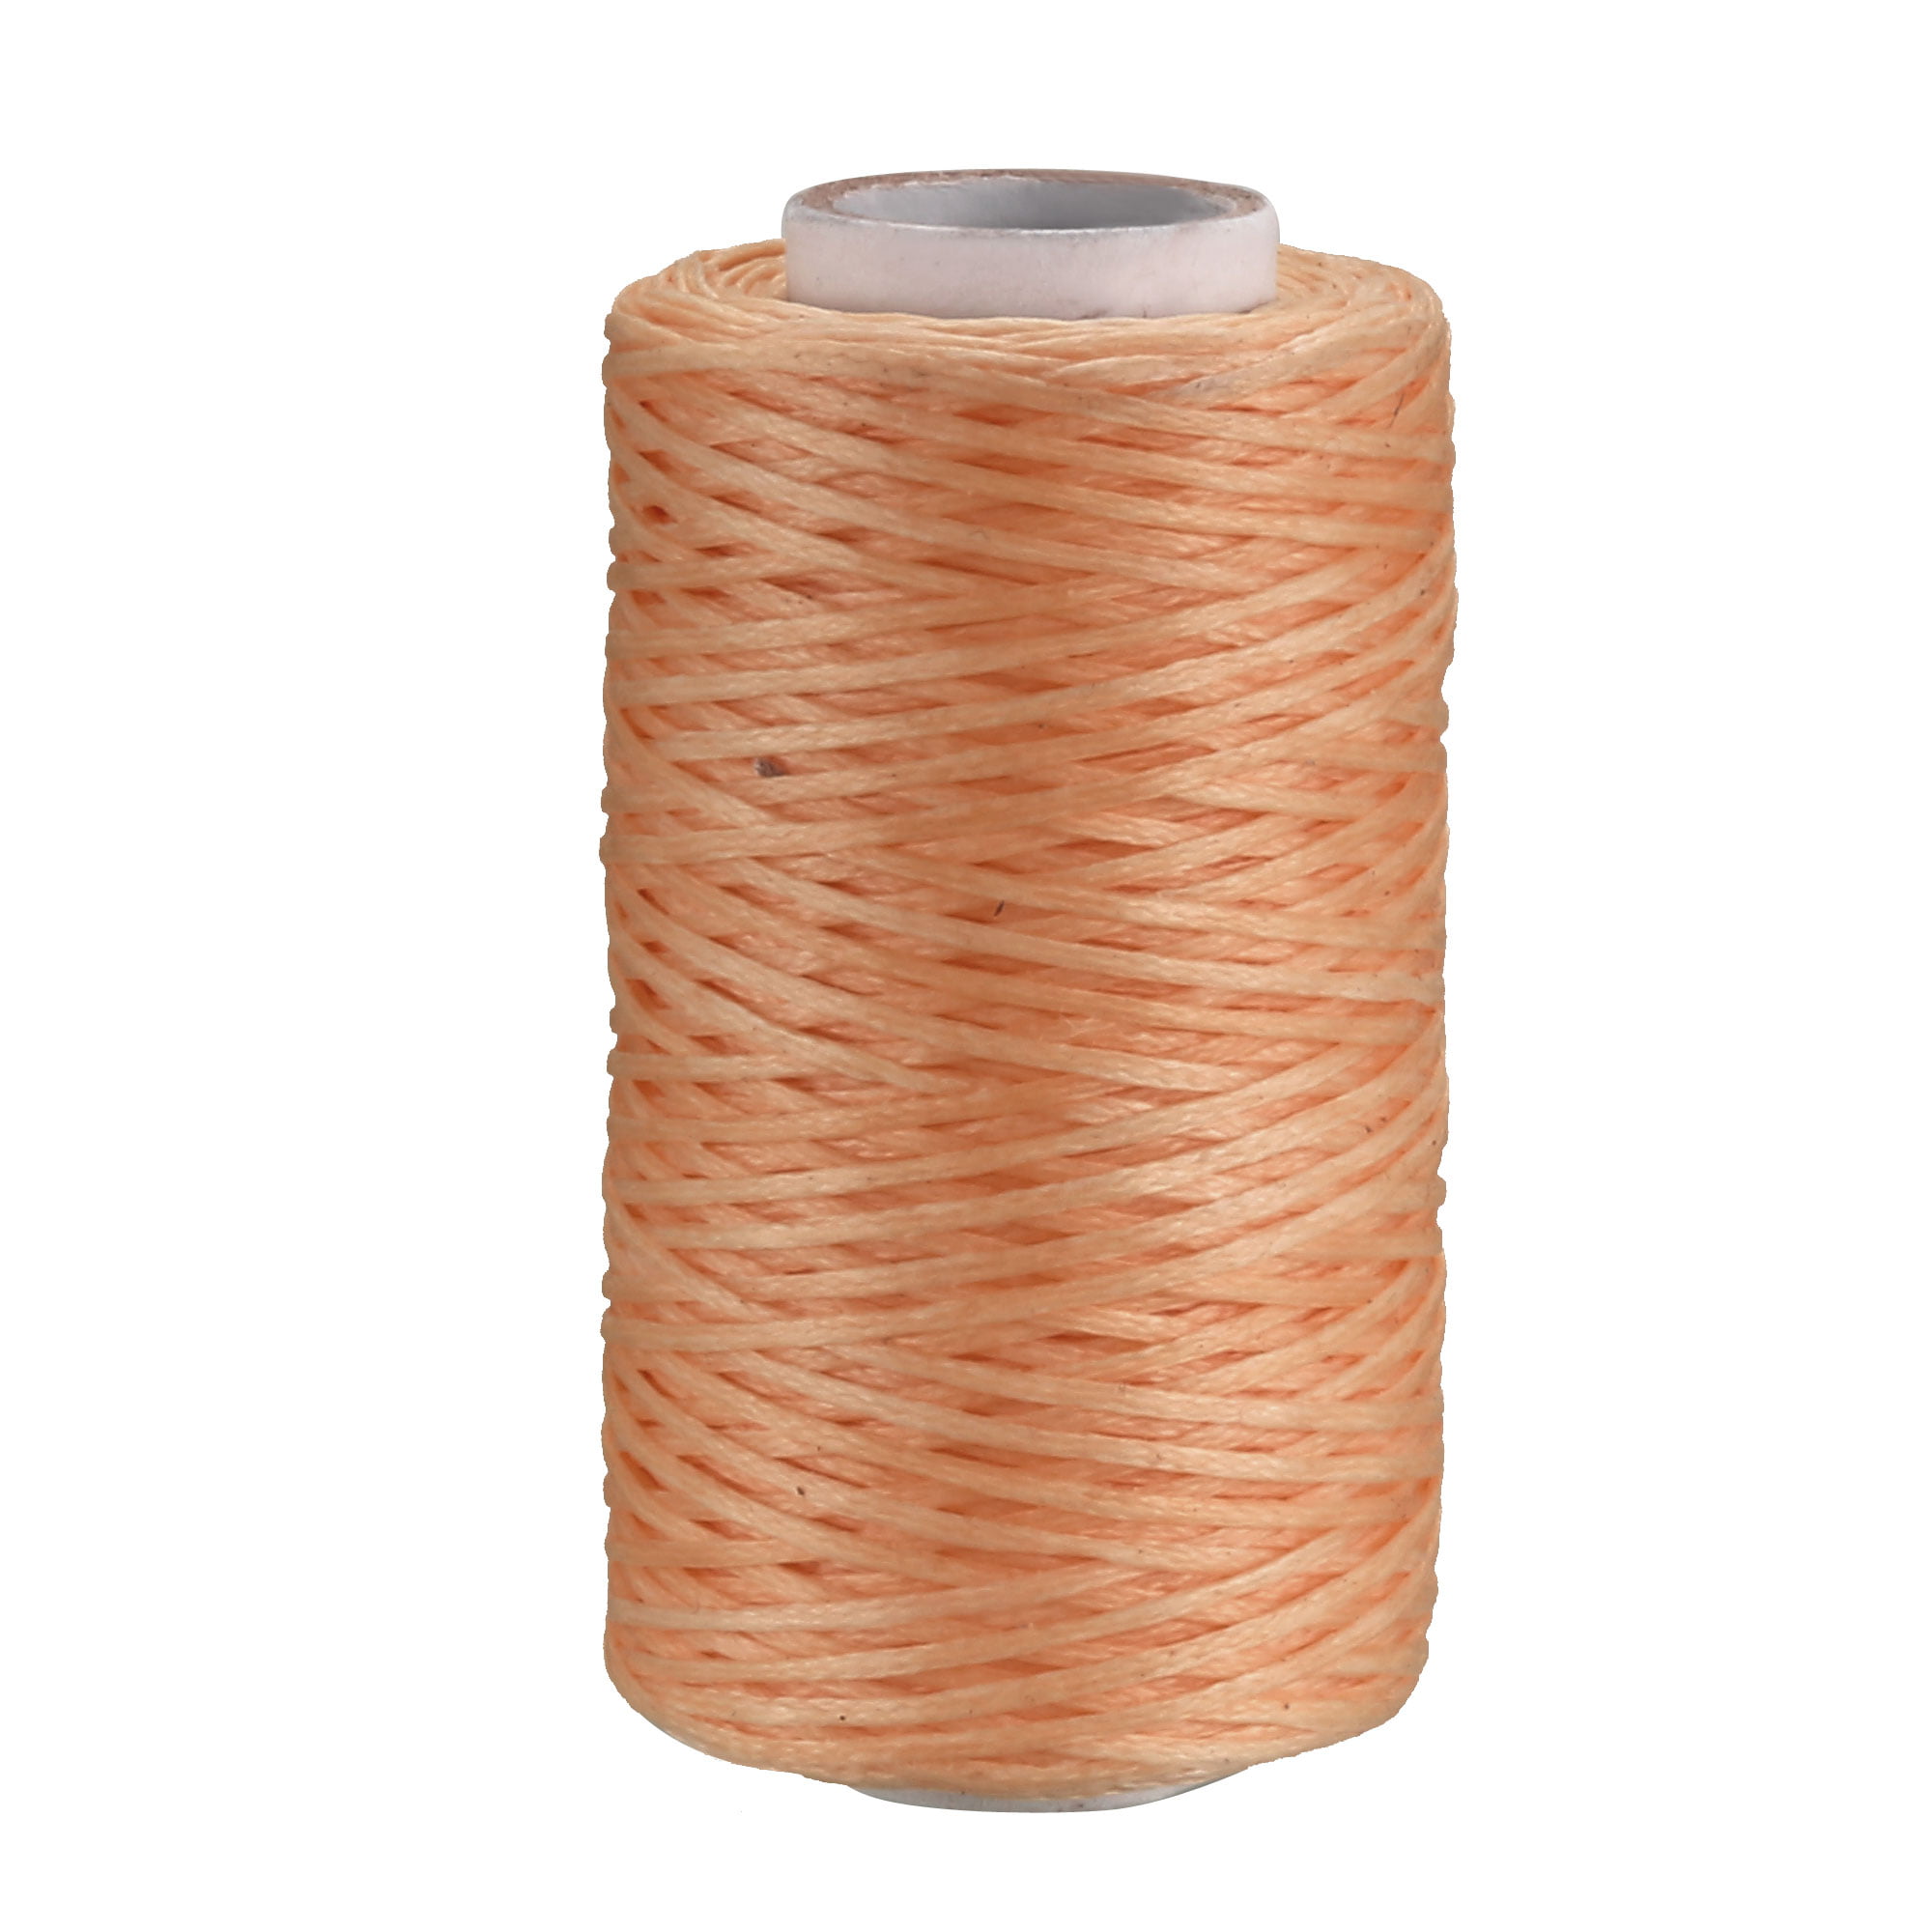 1pc 50m Waxed Thread Cord 150d Polyester Stitching Thread Handicraft Sewing Tool 